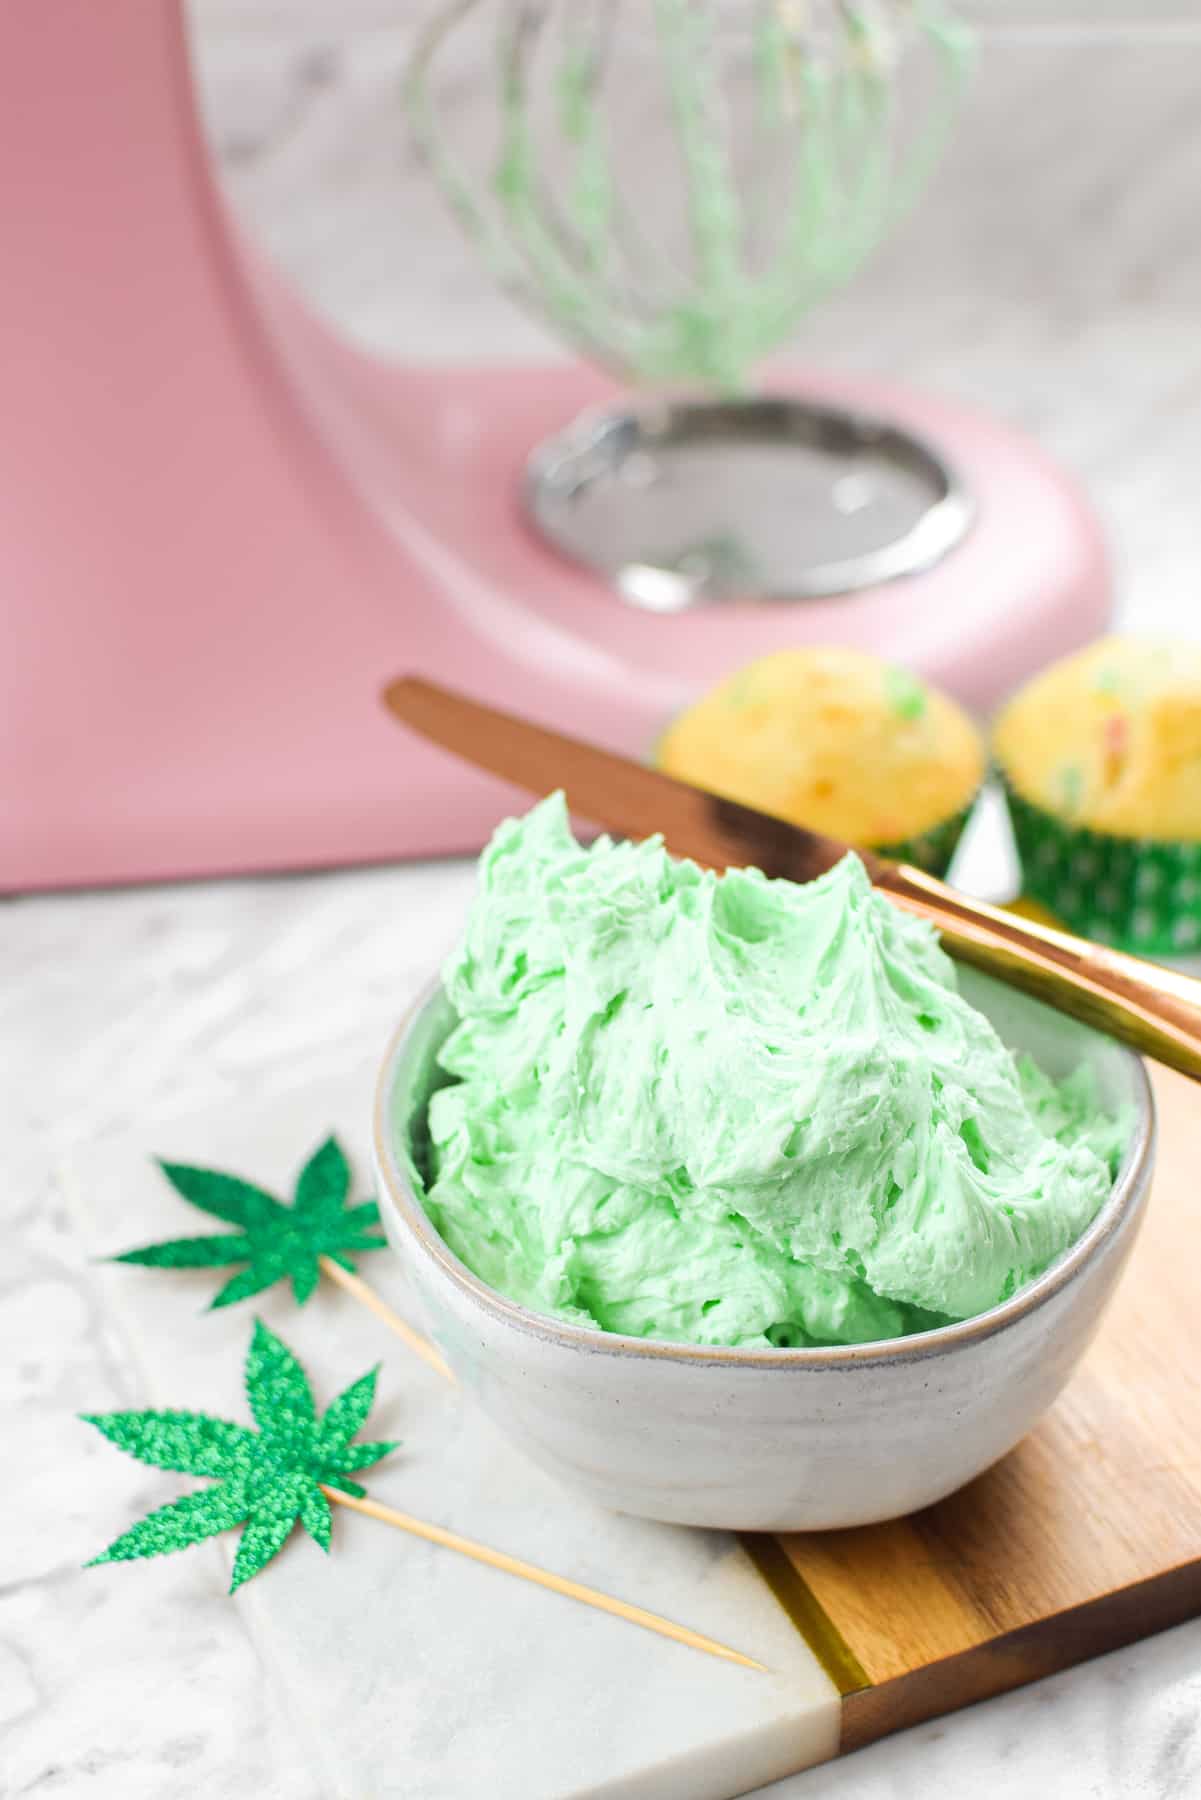 A white countertop with a bowl of green cannabis buttercream frosting